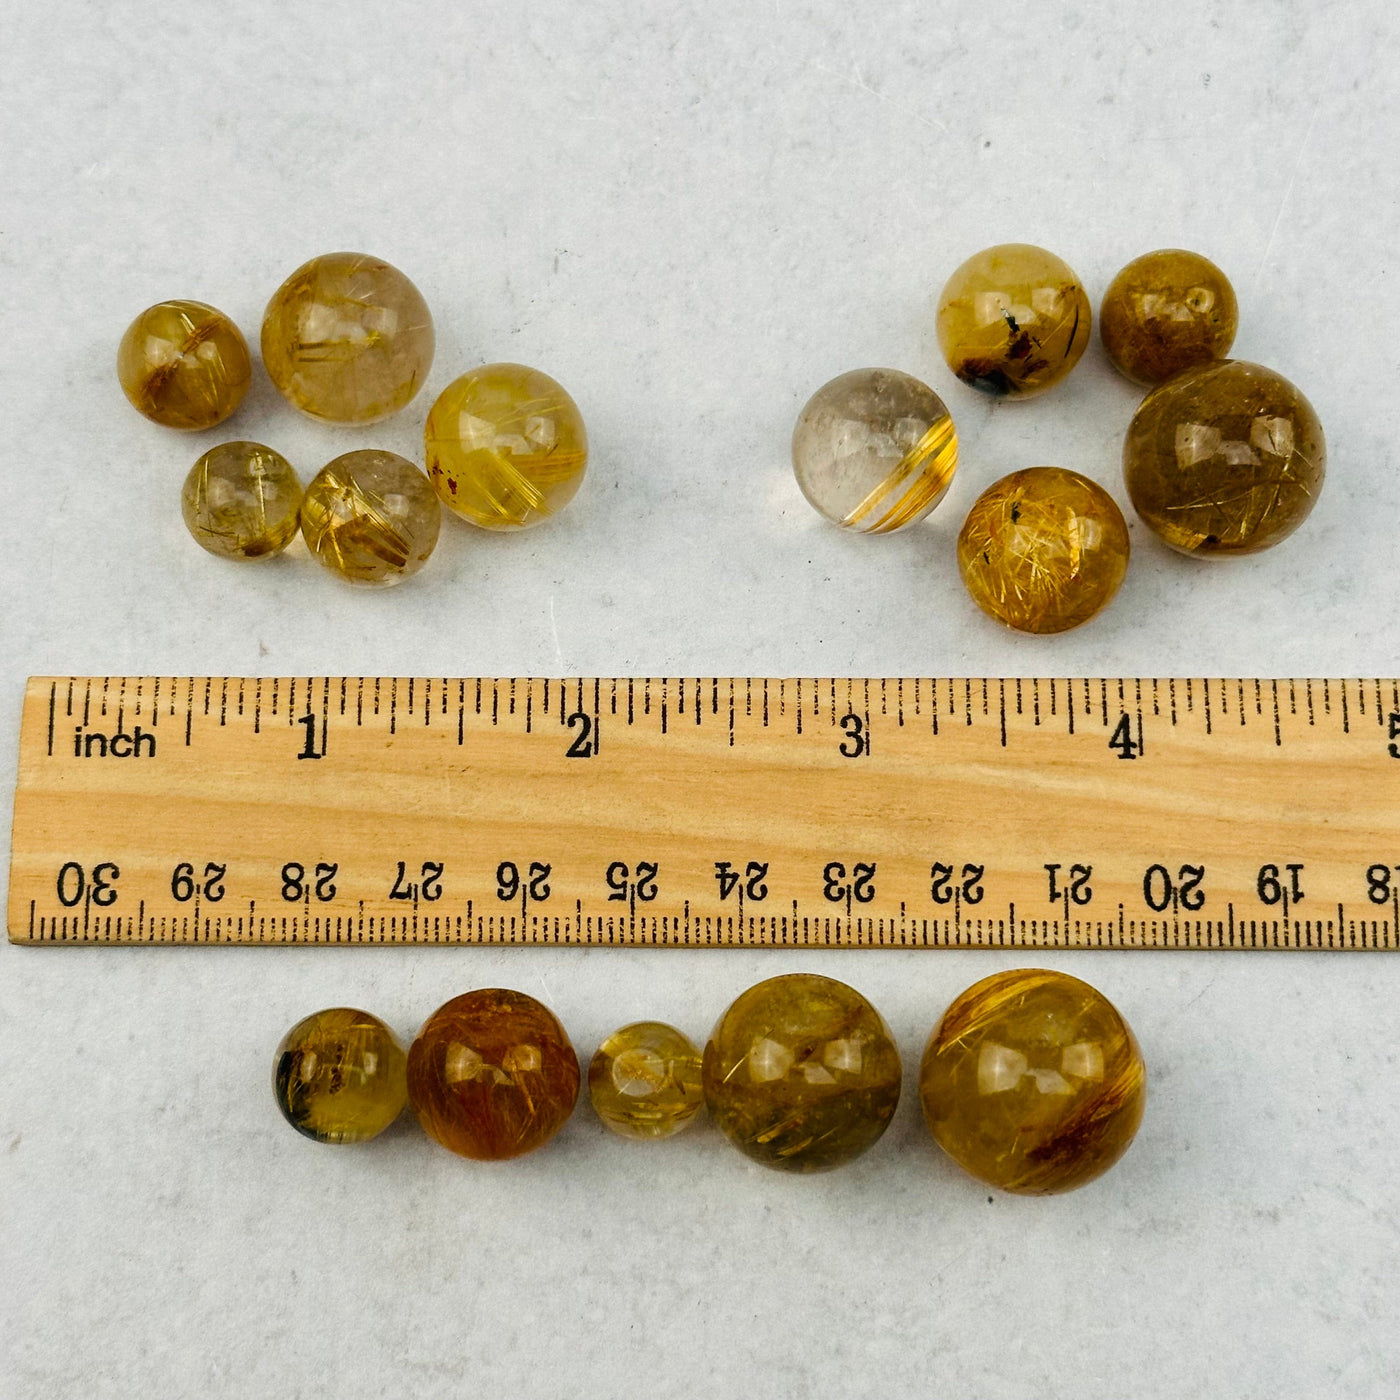 spheres next to a ruler for size reference 